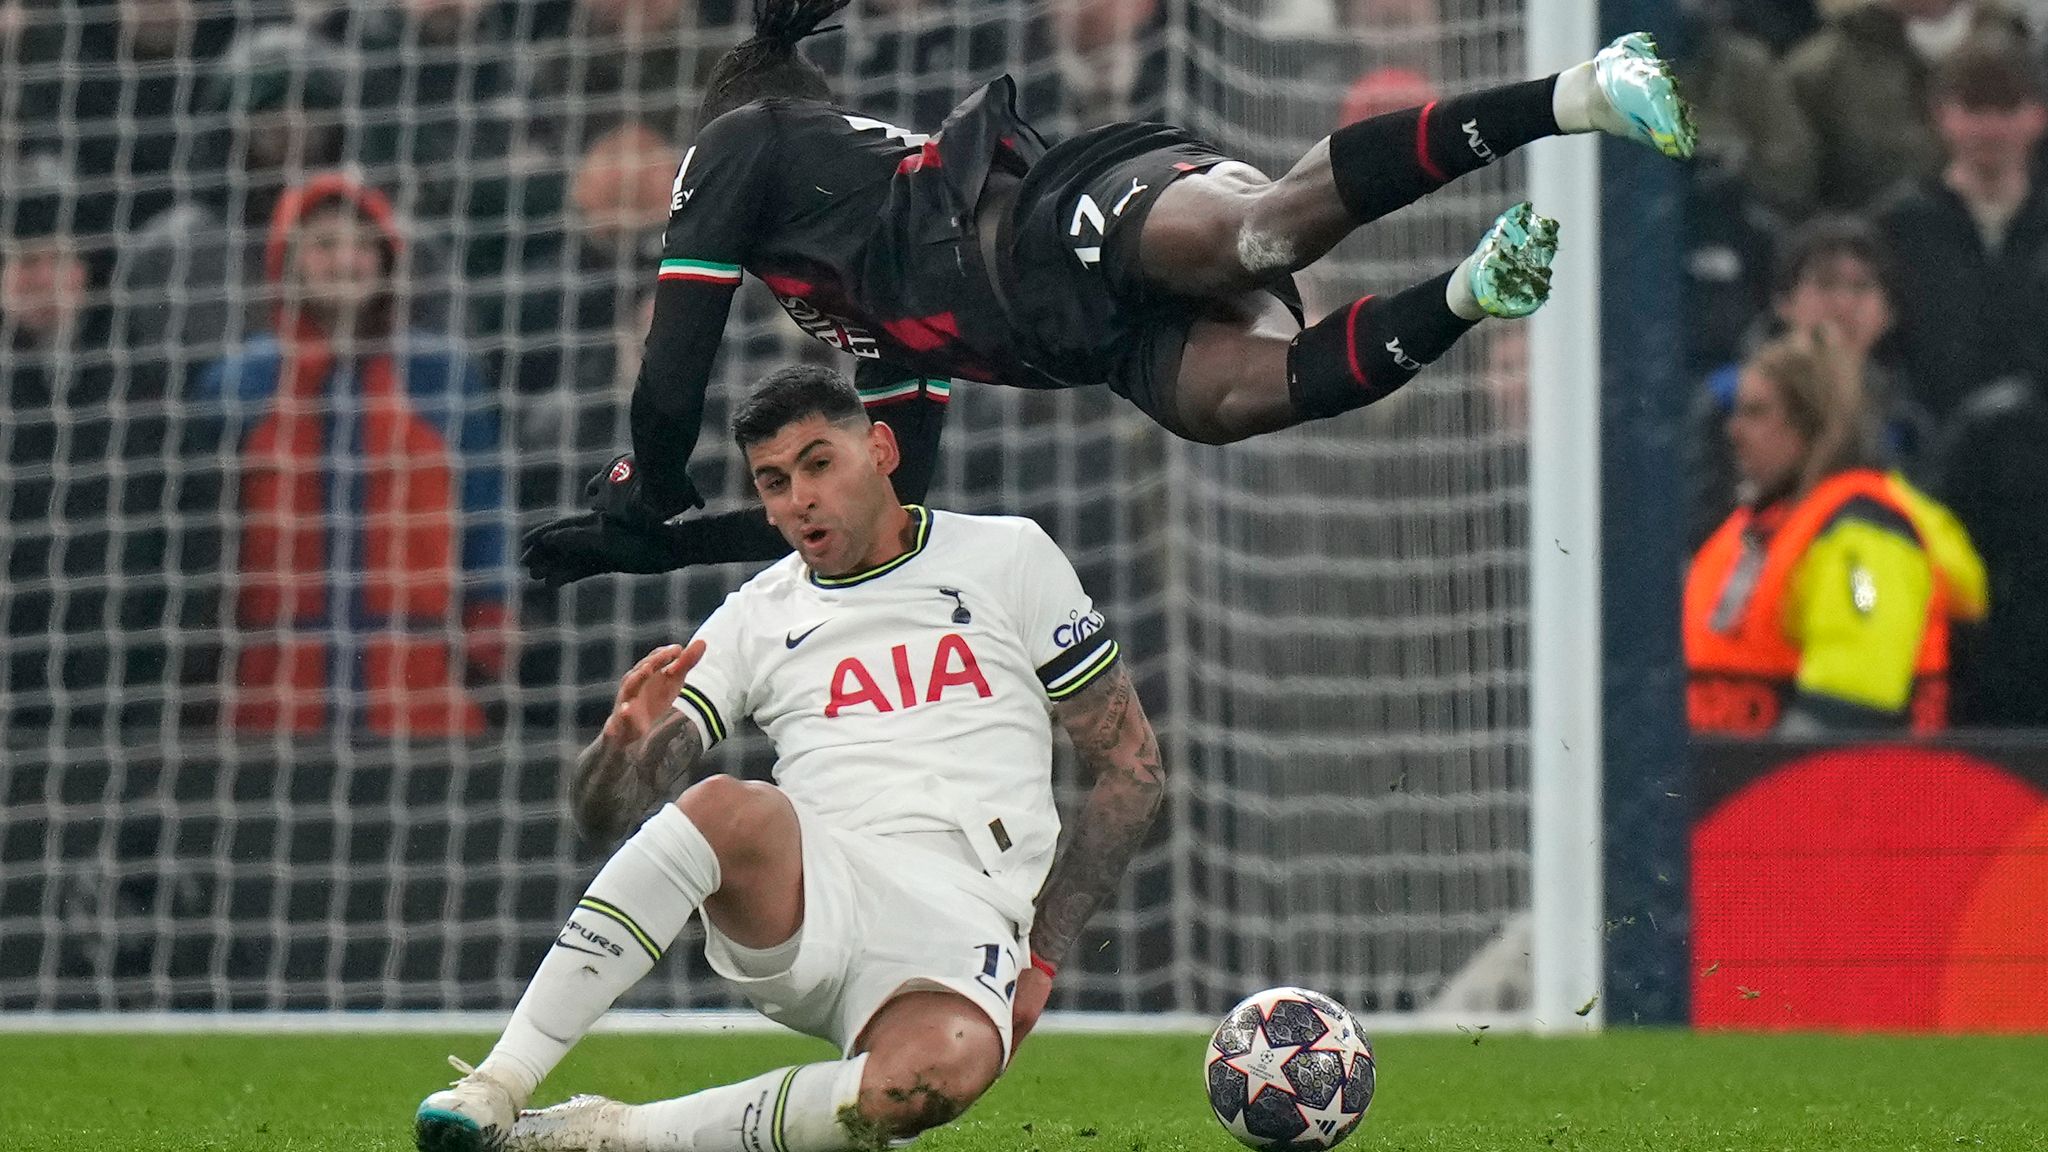 Tottenham 0-0 AC Milan (agg 0-1) Antonio Contes side dumped out of Champions League as 15-year trophy drought continues Football News Sky Sports